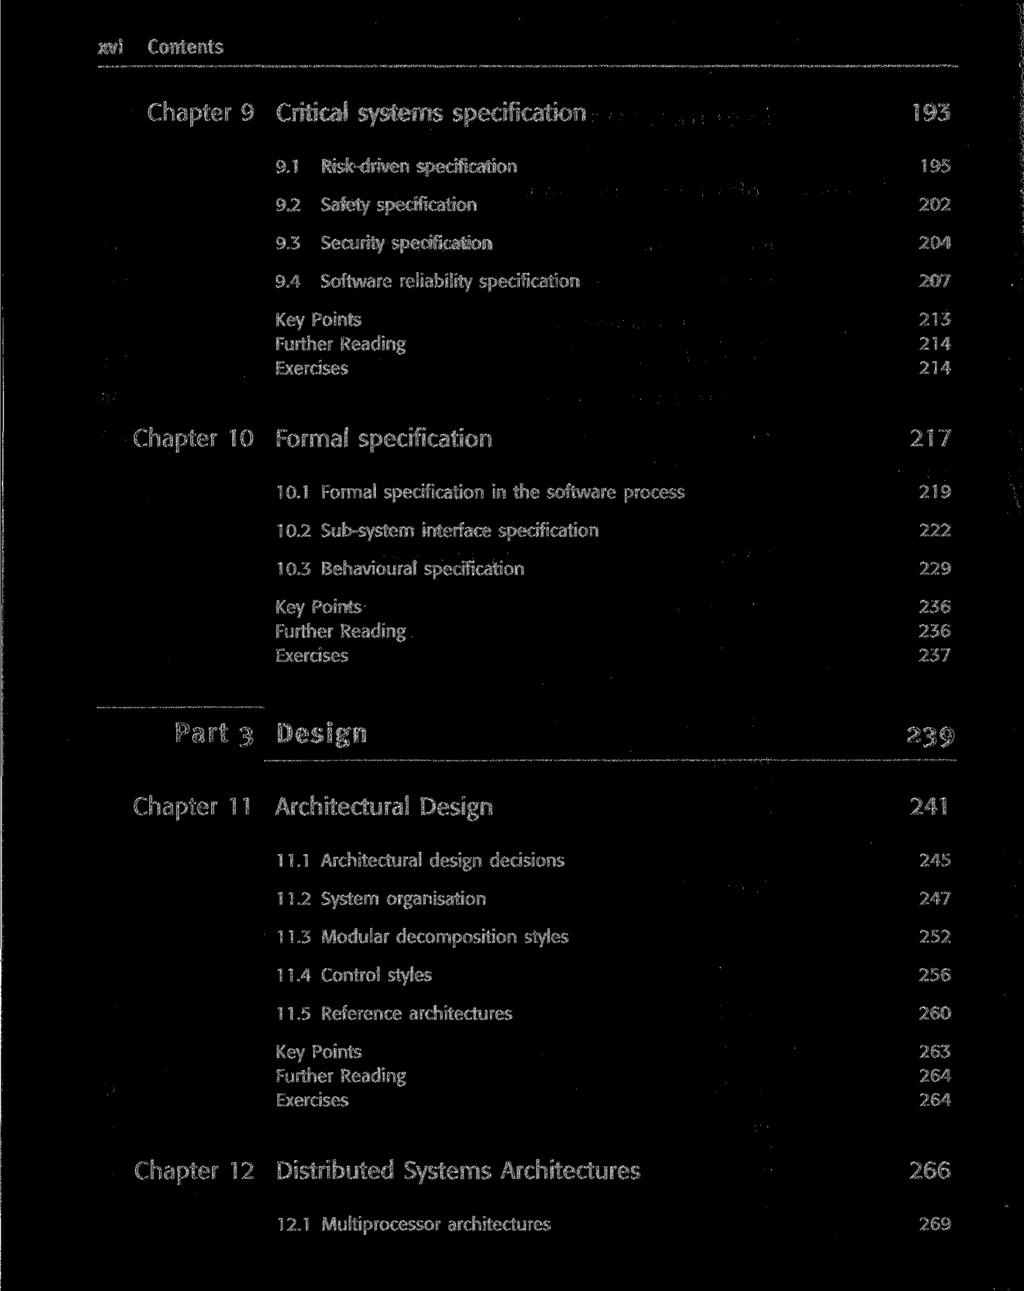 xvi Contents Chapter 9 Critical Systems specification 193 9.1 Risk-driven specification 195 9.2 Safety specification 202 9.3 Security specification 204 9.